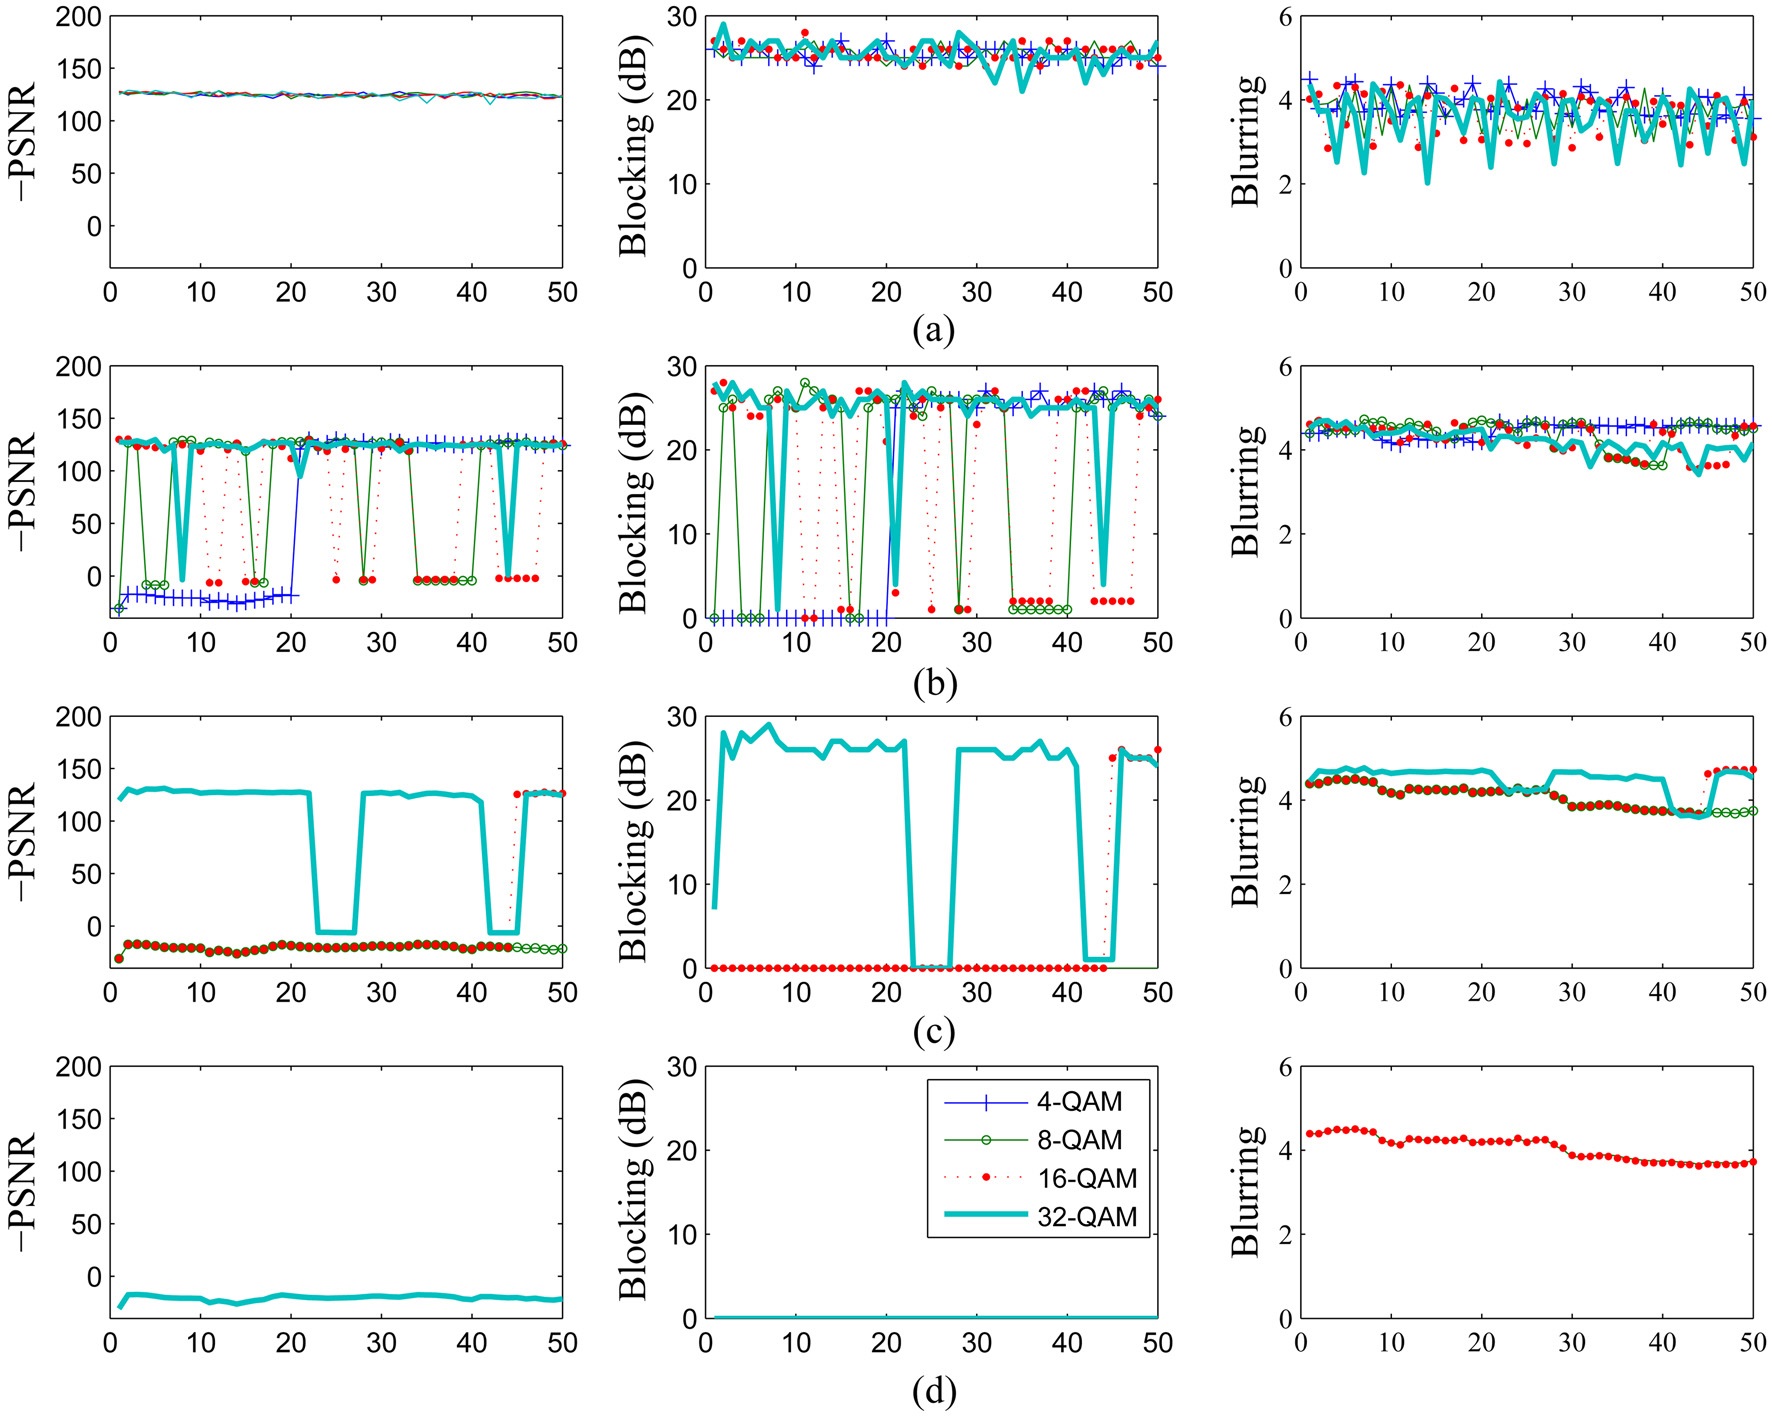 Quality assessment using peak signal-to-noise ratio (PSNR), blocking, and blurring metrics: (a) SNR 0 dB, (b) SNR 10 dB, (C) SNR 13 dB, and (d) SNR 17 dB. We observe lower blocking values for lower modulation. Code rate was kept constant at 1/2 while hybrid automatic repeat request was set to long-term evolution (LTE) default value of 4. The invisible plots in some figures are due to overlapping by higher modulation rates.